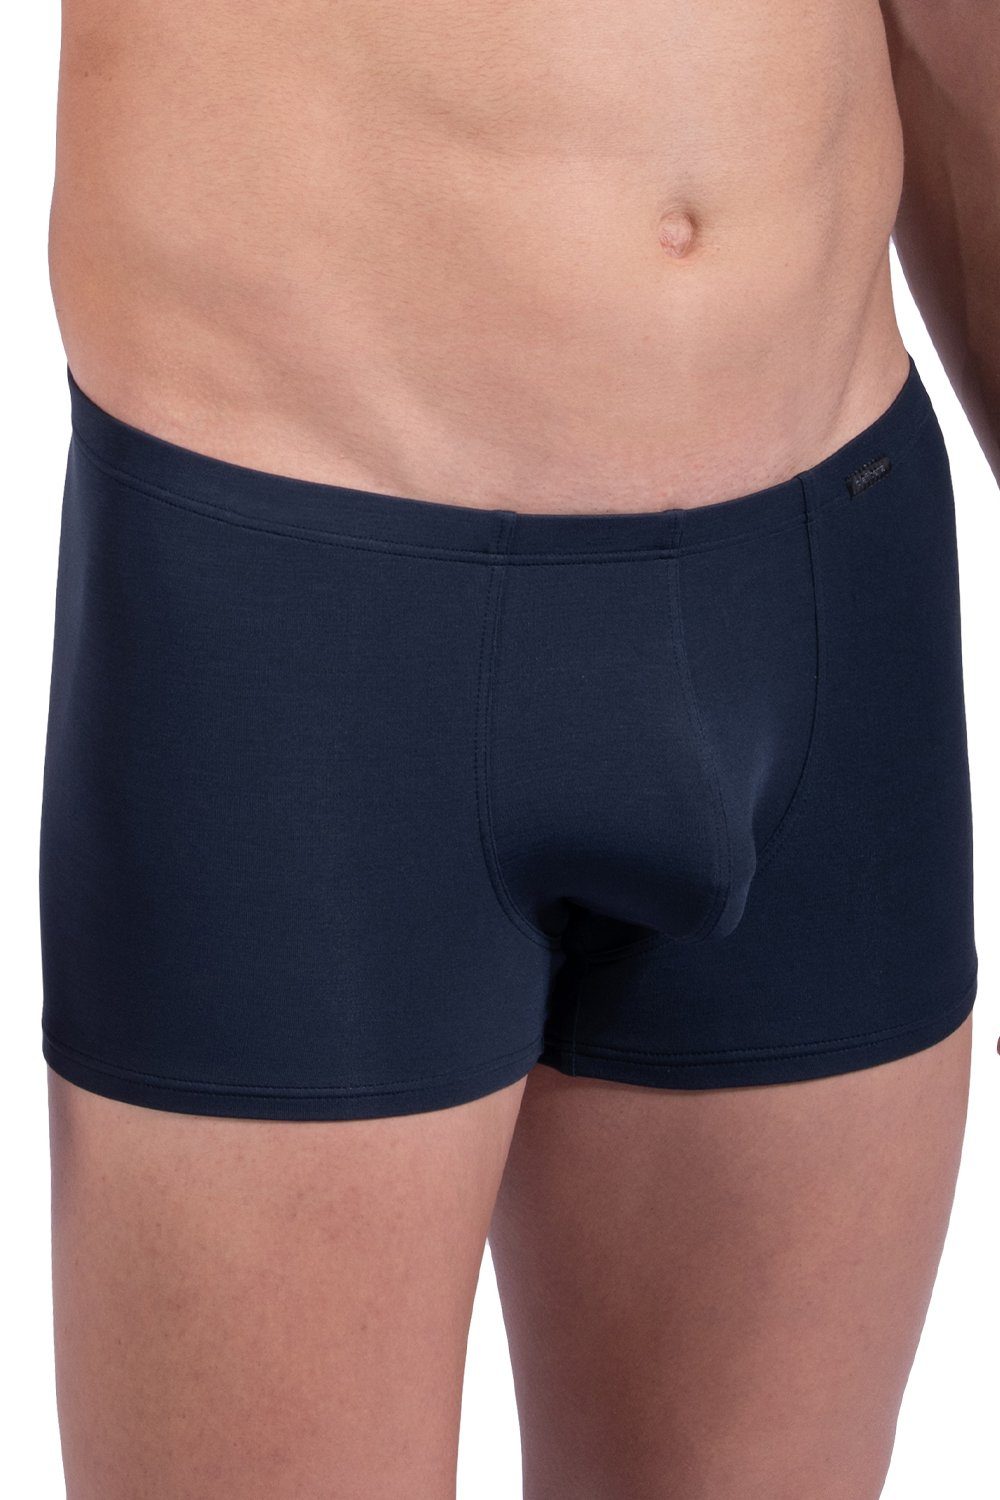 Olaf Benz Hipster Minipants 109262